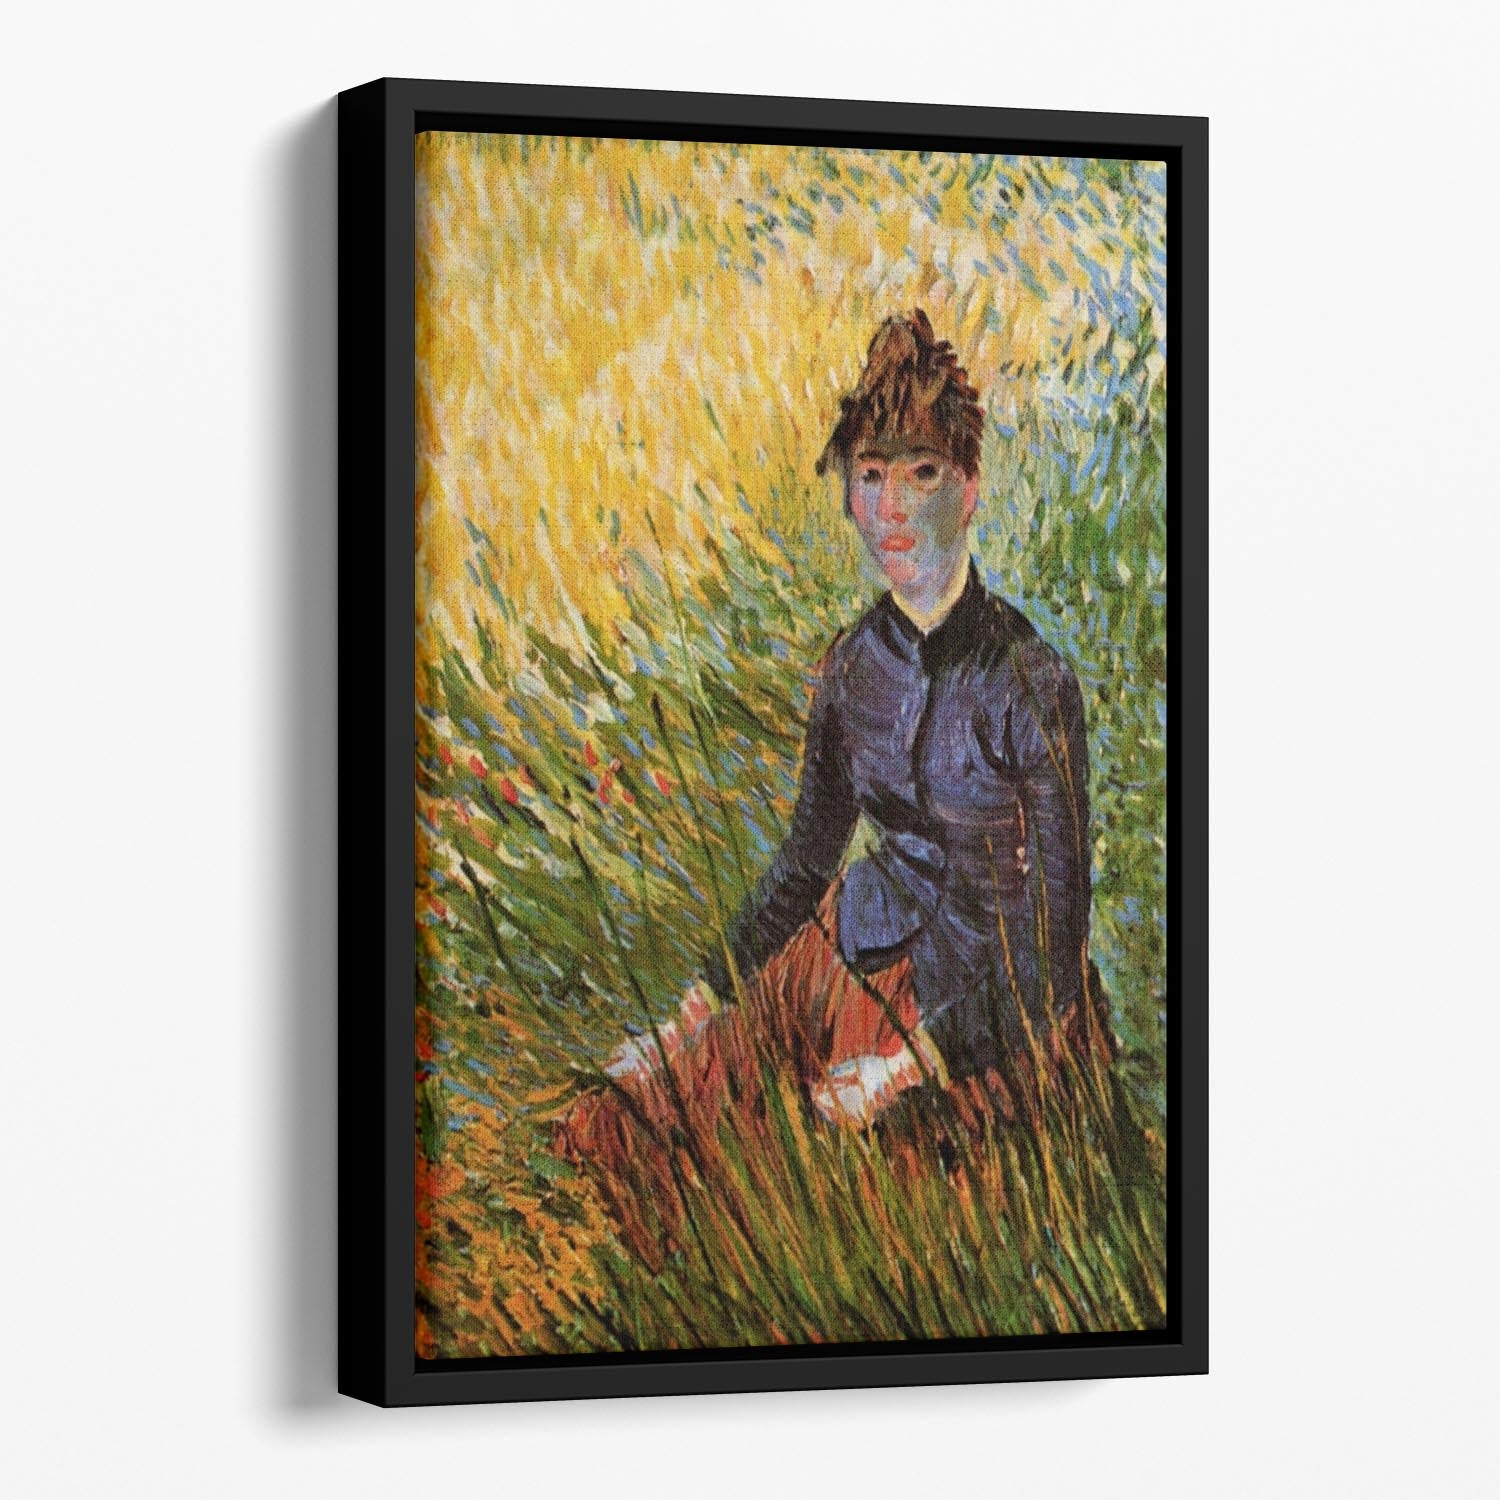 Woman Sitting in the Grass by Van Gogh Floating Framed Canvas